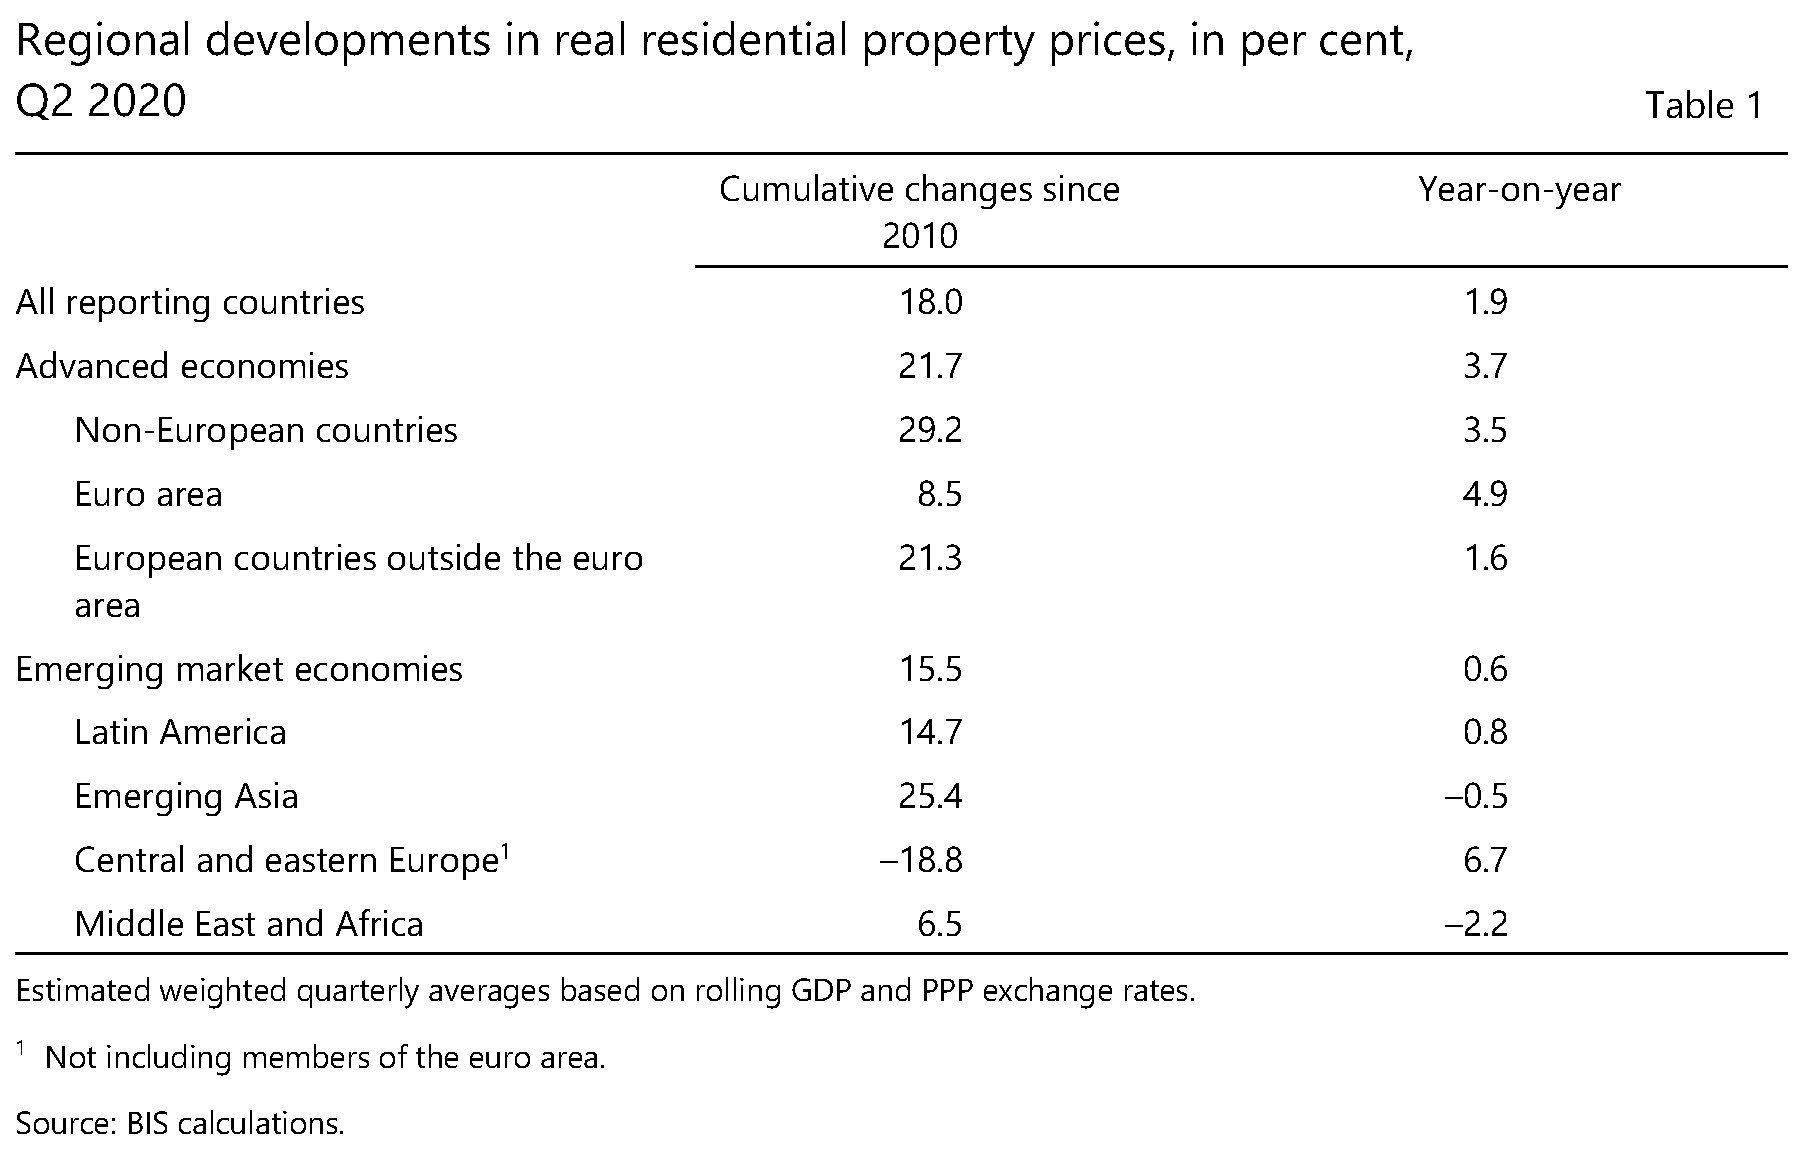 Regional developments in real residential property prices, in per cent, Q2 2020